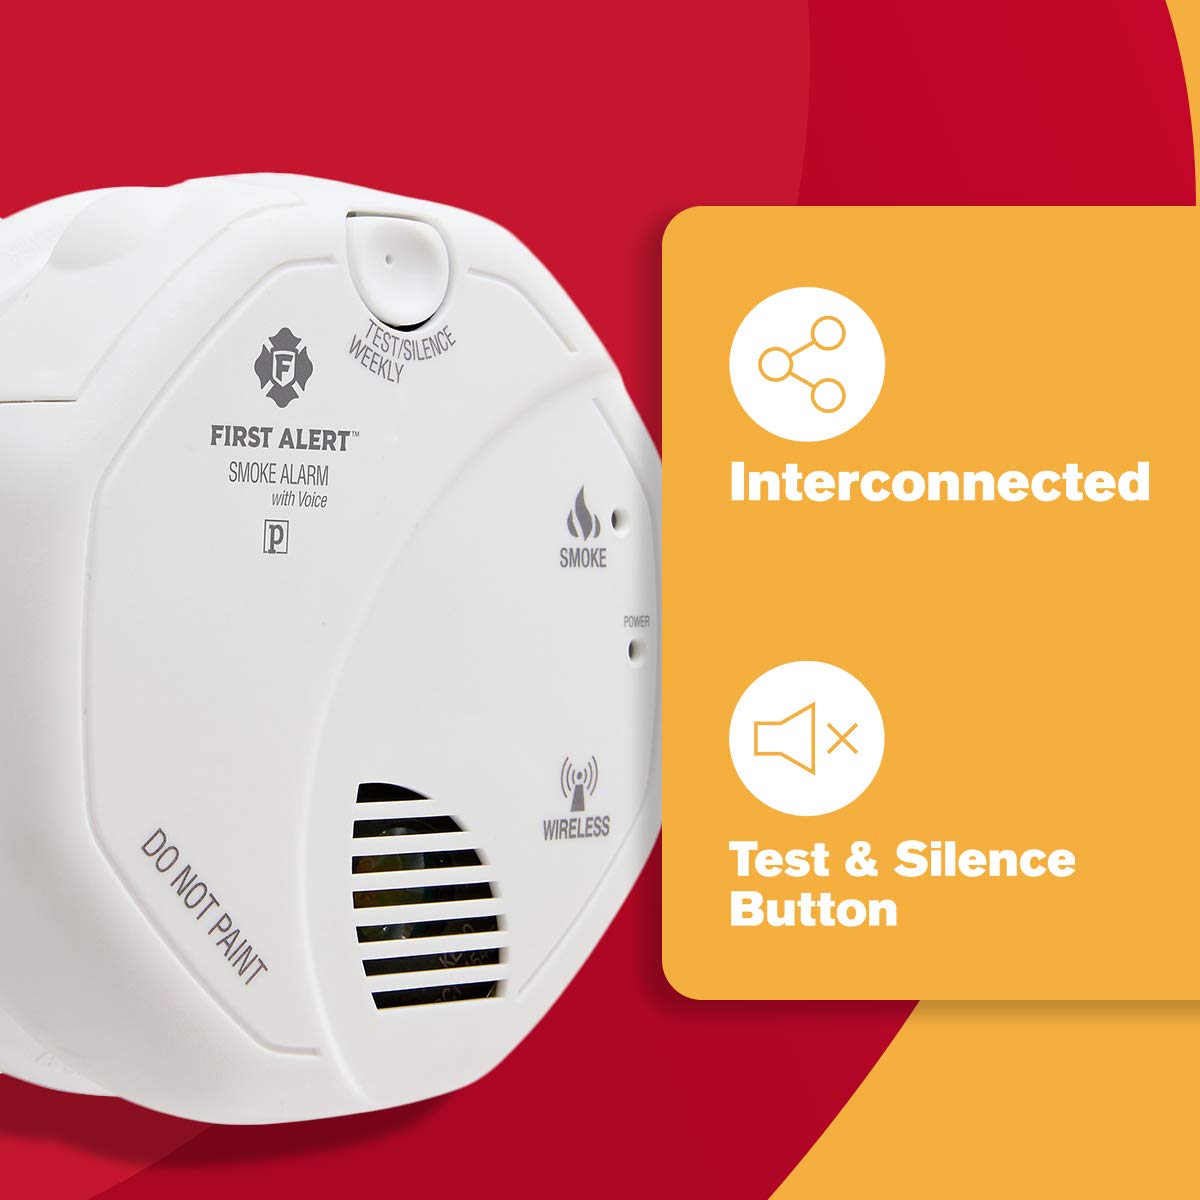 First Alert SA511CN2-3ST Interconnected Wireless Smoke Alarm with Voice Location, 2-Pack - image 3 of 9